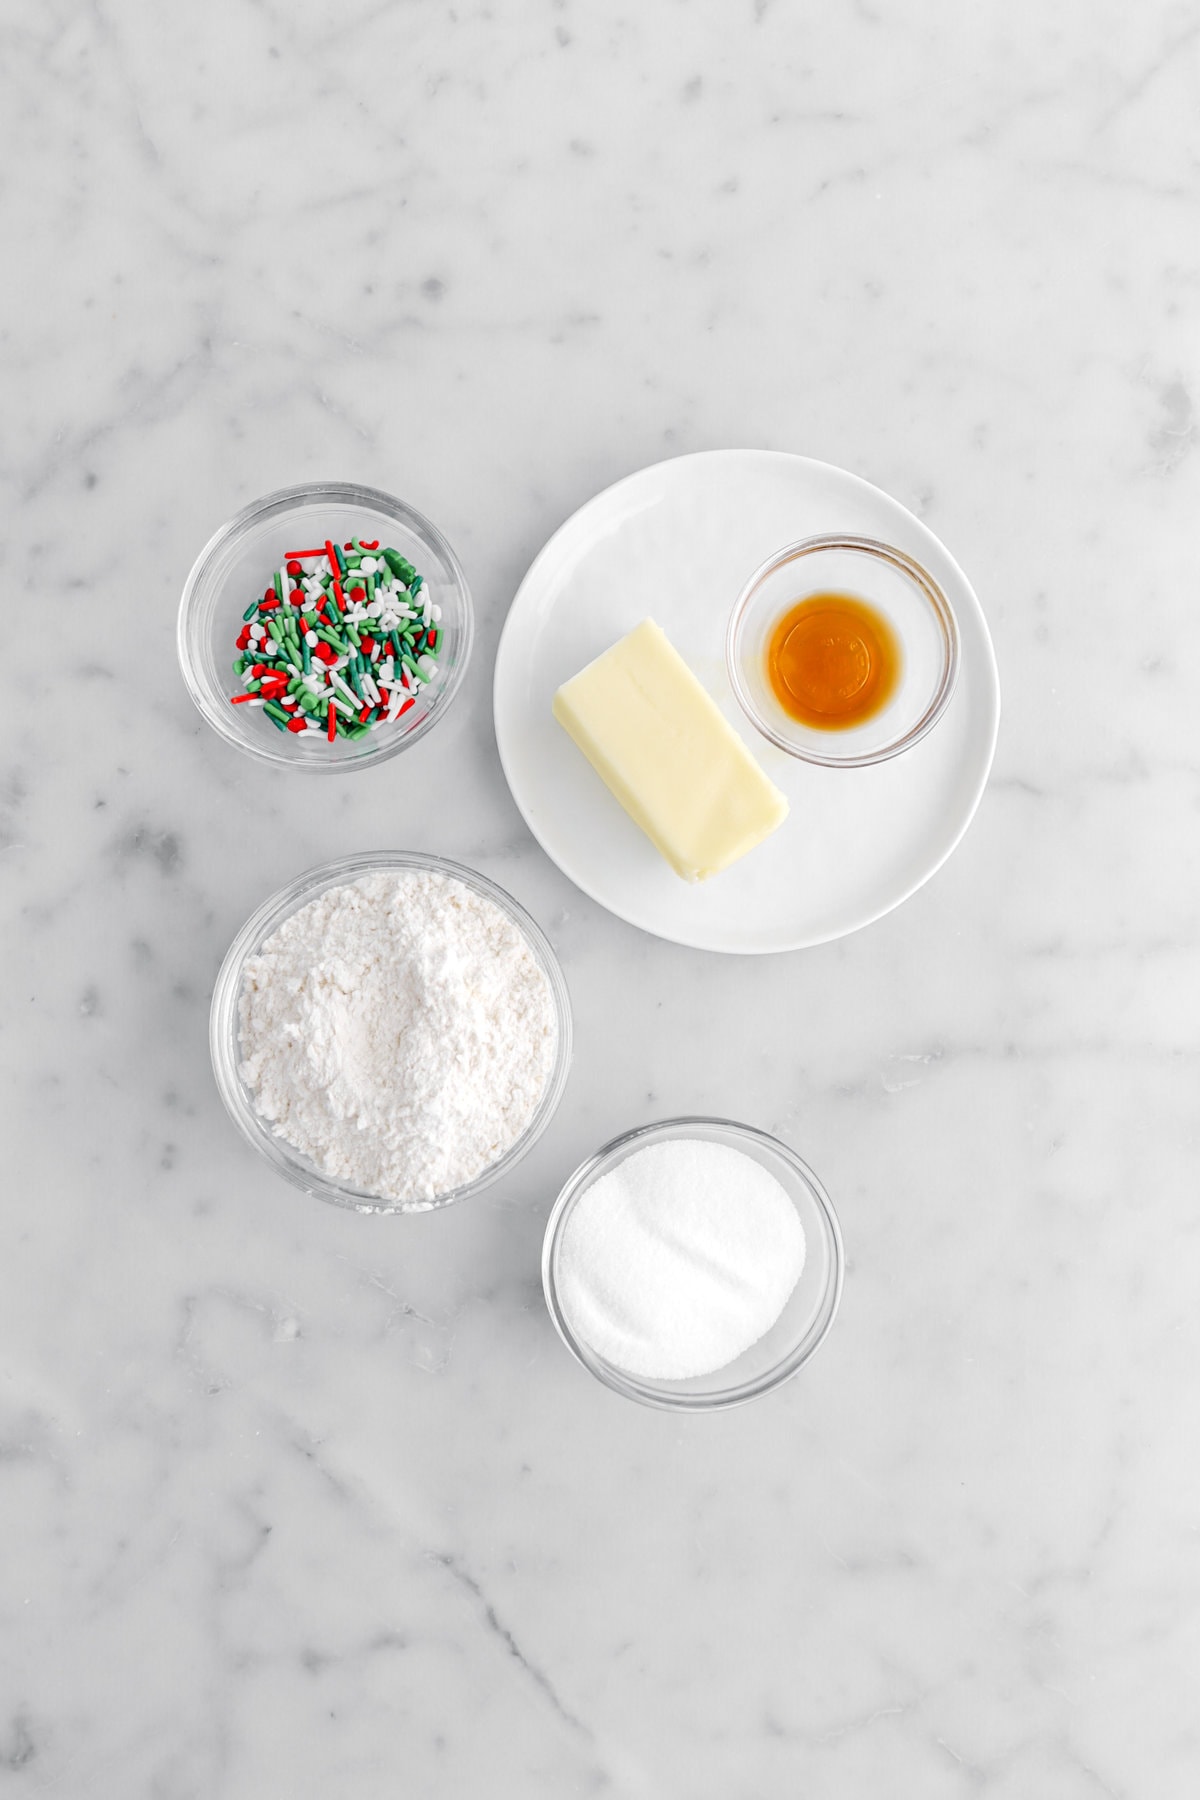 sprinkles, butter, vanilla, flour, and sugar on marble surface.